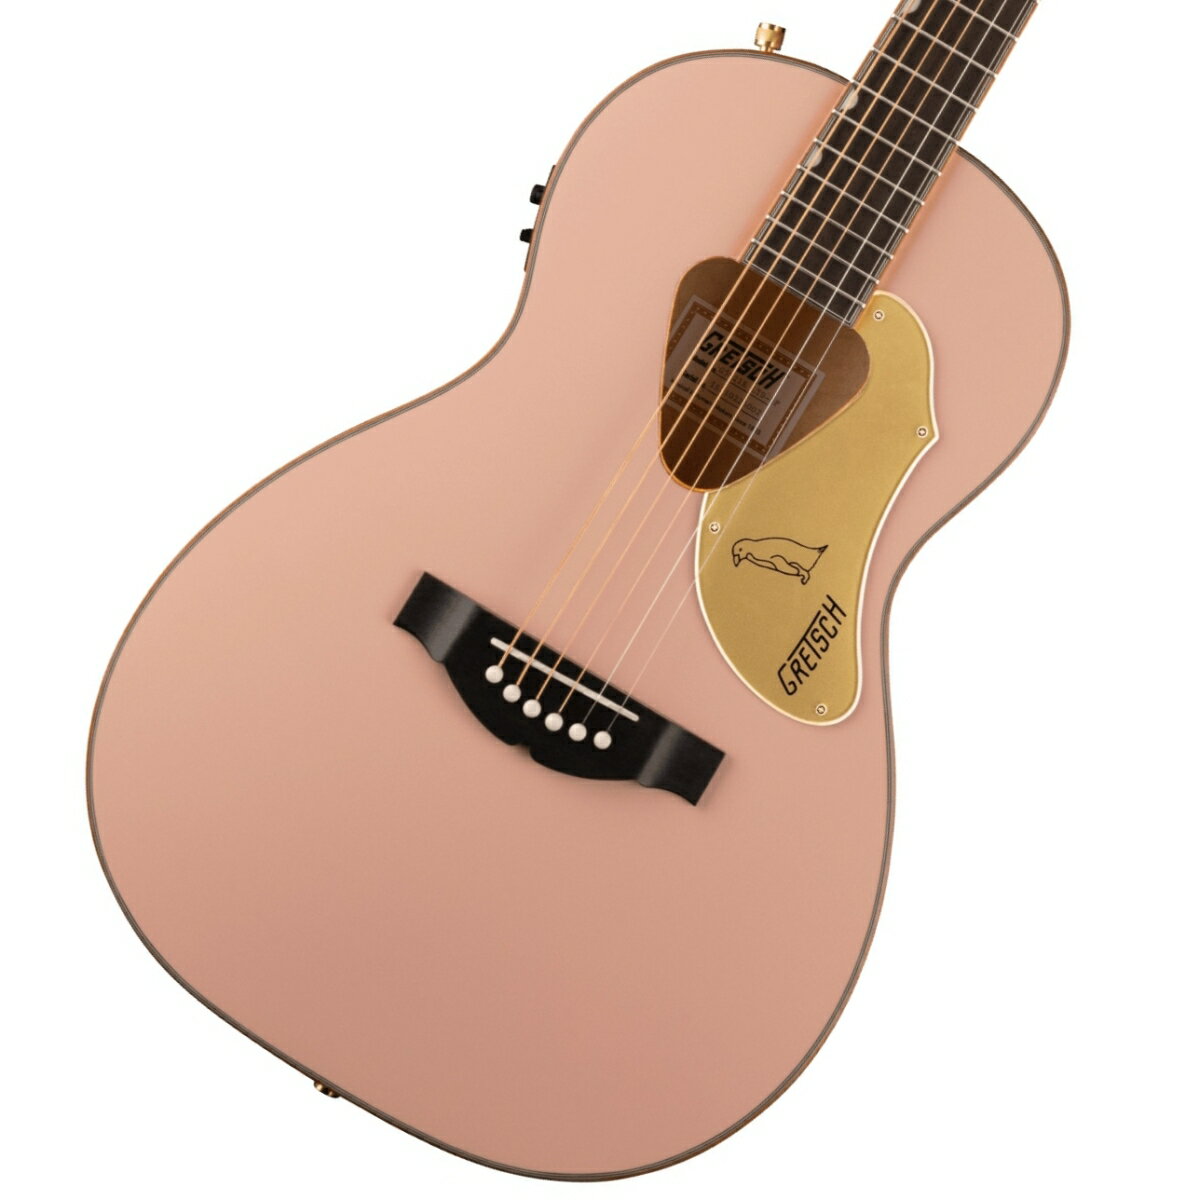 《WEBSHOPクリアランスセール》【在庫有り】 Gretsch / G5021E Rancher Penguin Parlor Acoustic/Electric Shell Pink グレッチ エレアコ アコースティックギター アコギ 《+4582600680067》【PNG】